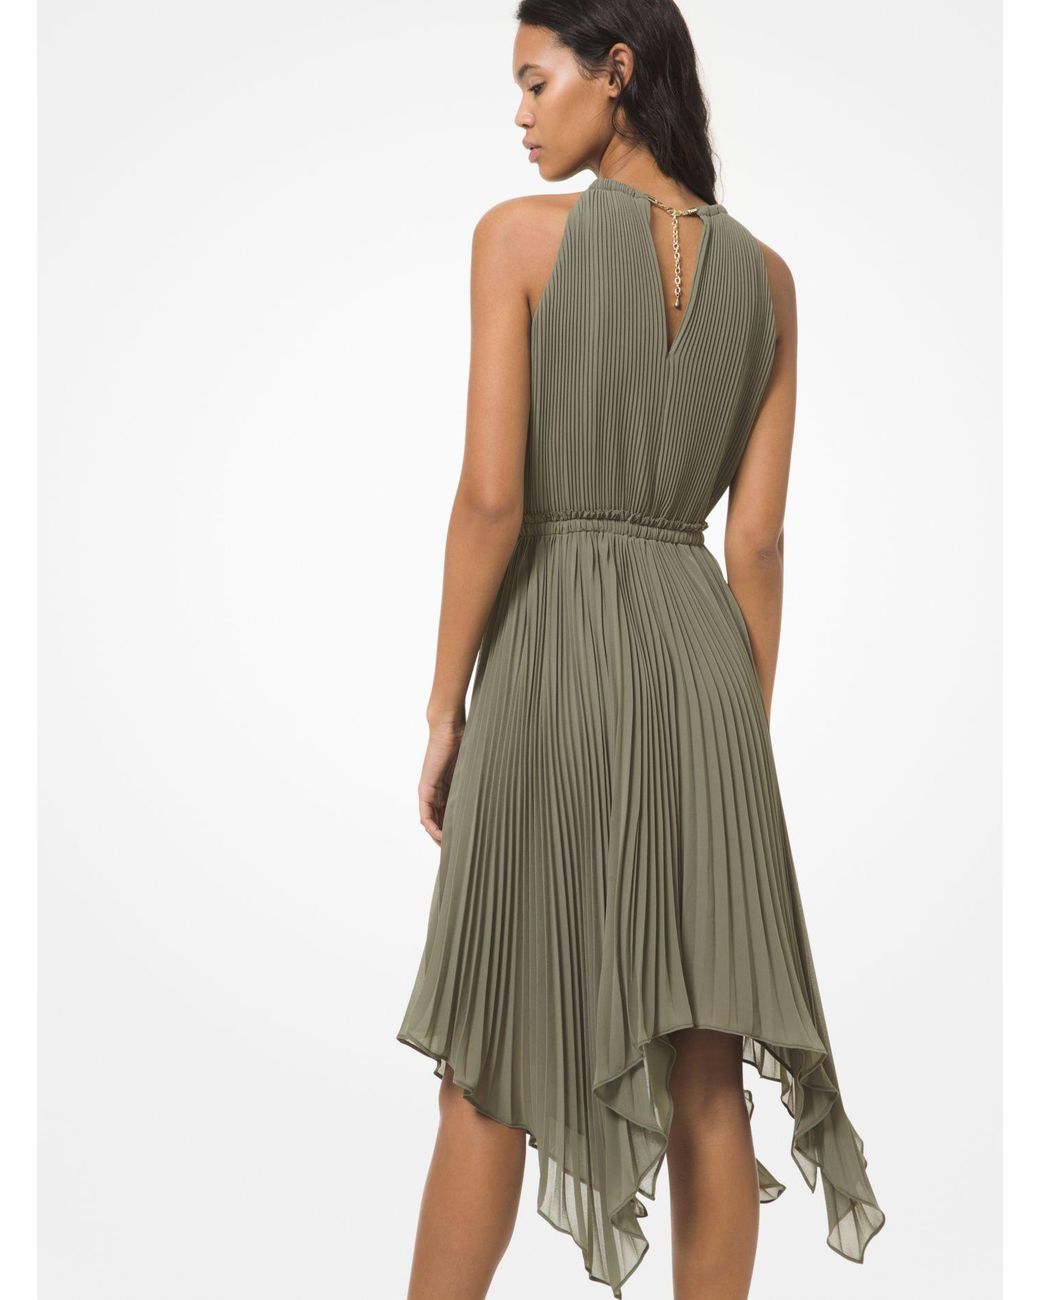 Michael Kors Synthetic Pleated Georgette Halter Dress in Army 